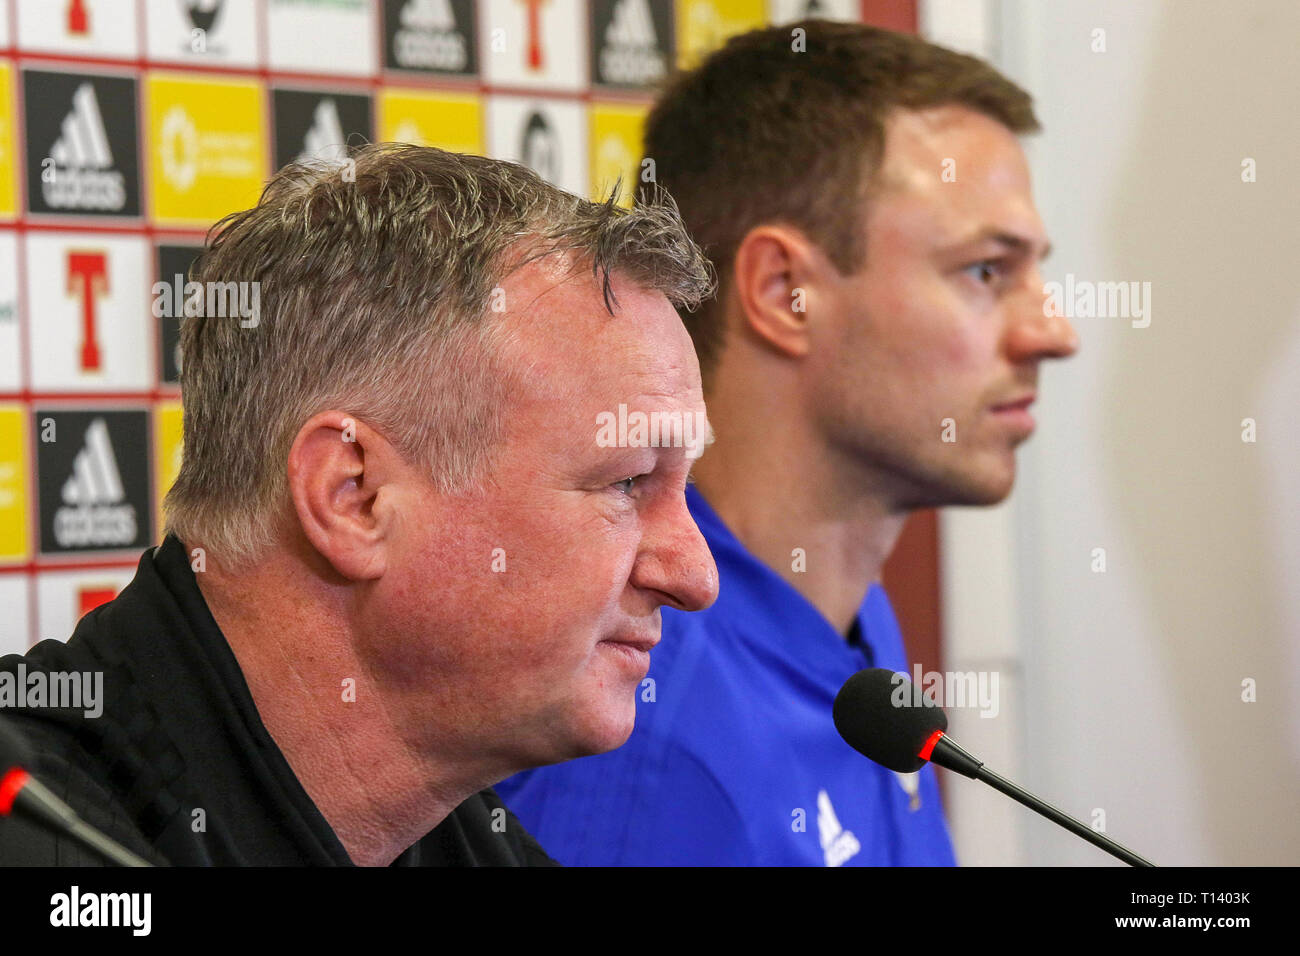 Windsor Park, Belfast, Northern, Ireland. 23rd Mar, 2019. Northern Ireland manager Michael O'Neill (l) and Jonny Evans at today's press conference in Belfast. Northern Ireland play Belarus at Windsor Park tomorrow evening in their second UEFA EURO 2020 Qualifying game. On Friday night Northern Ireland defeated Estonia 2-0 in their first qualifying game. Credit: David Hunter/Alamy Live News Stock Photo